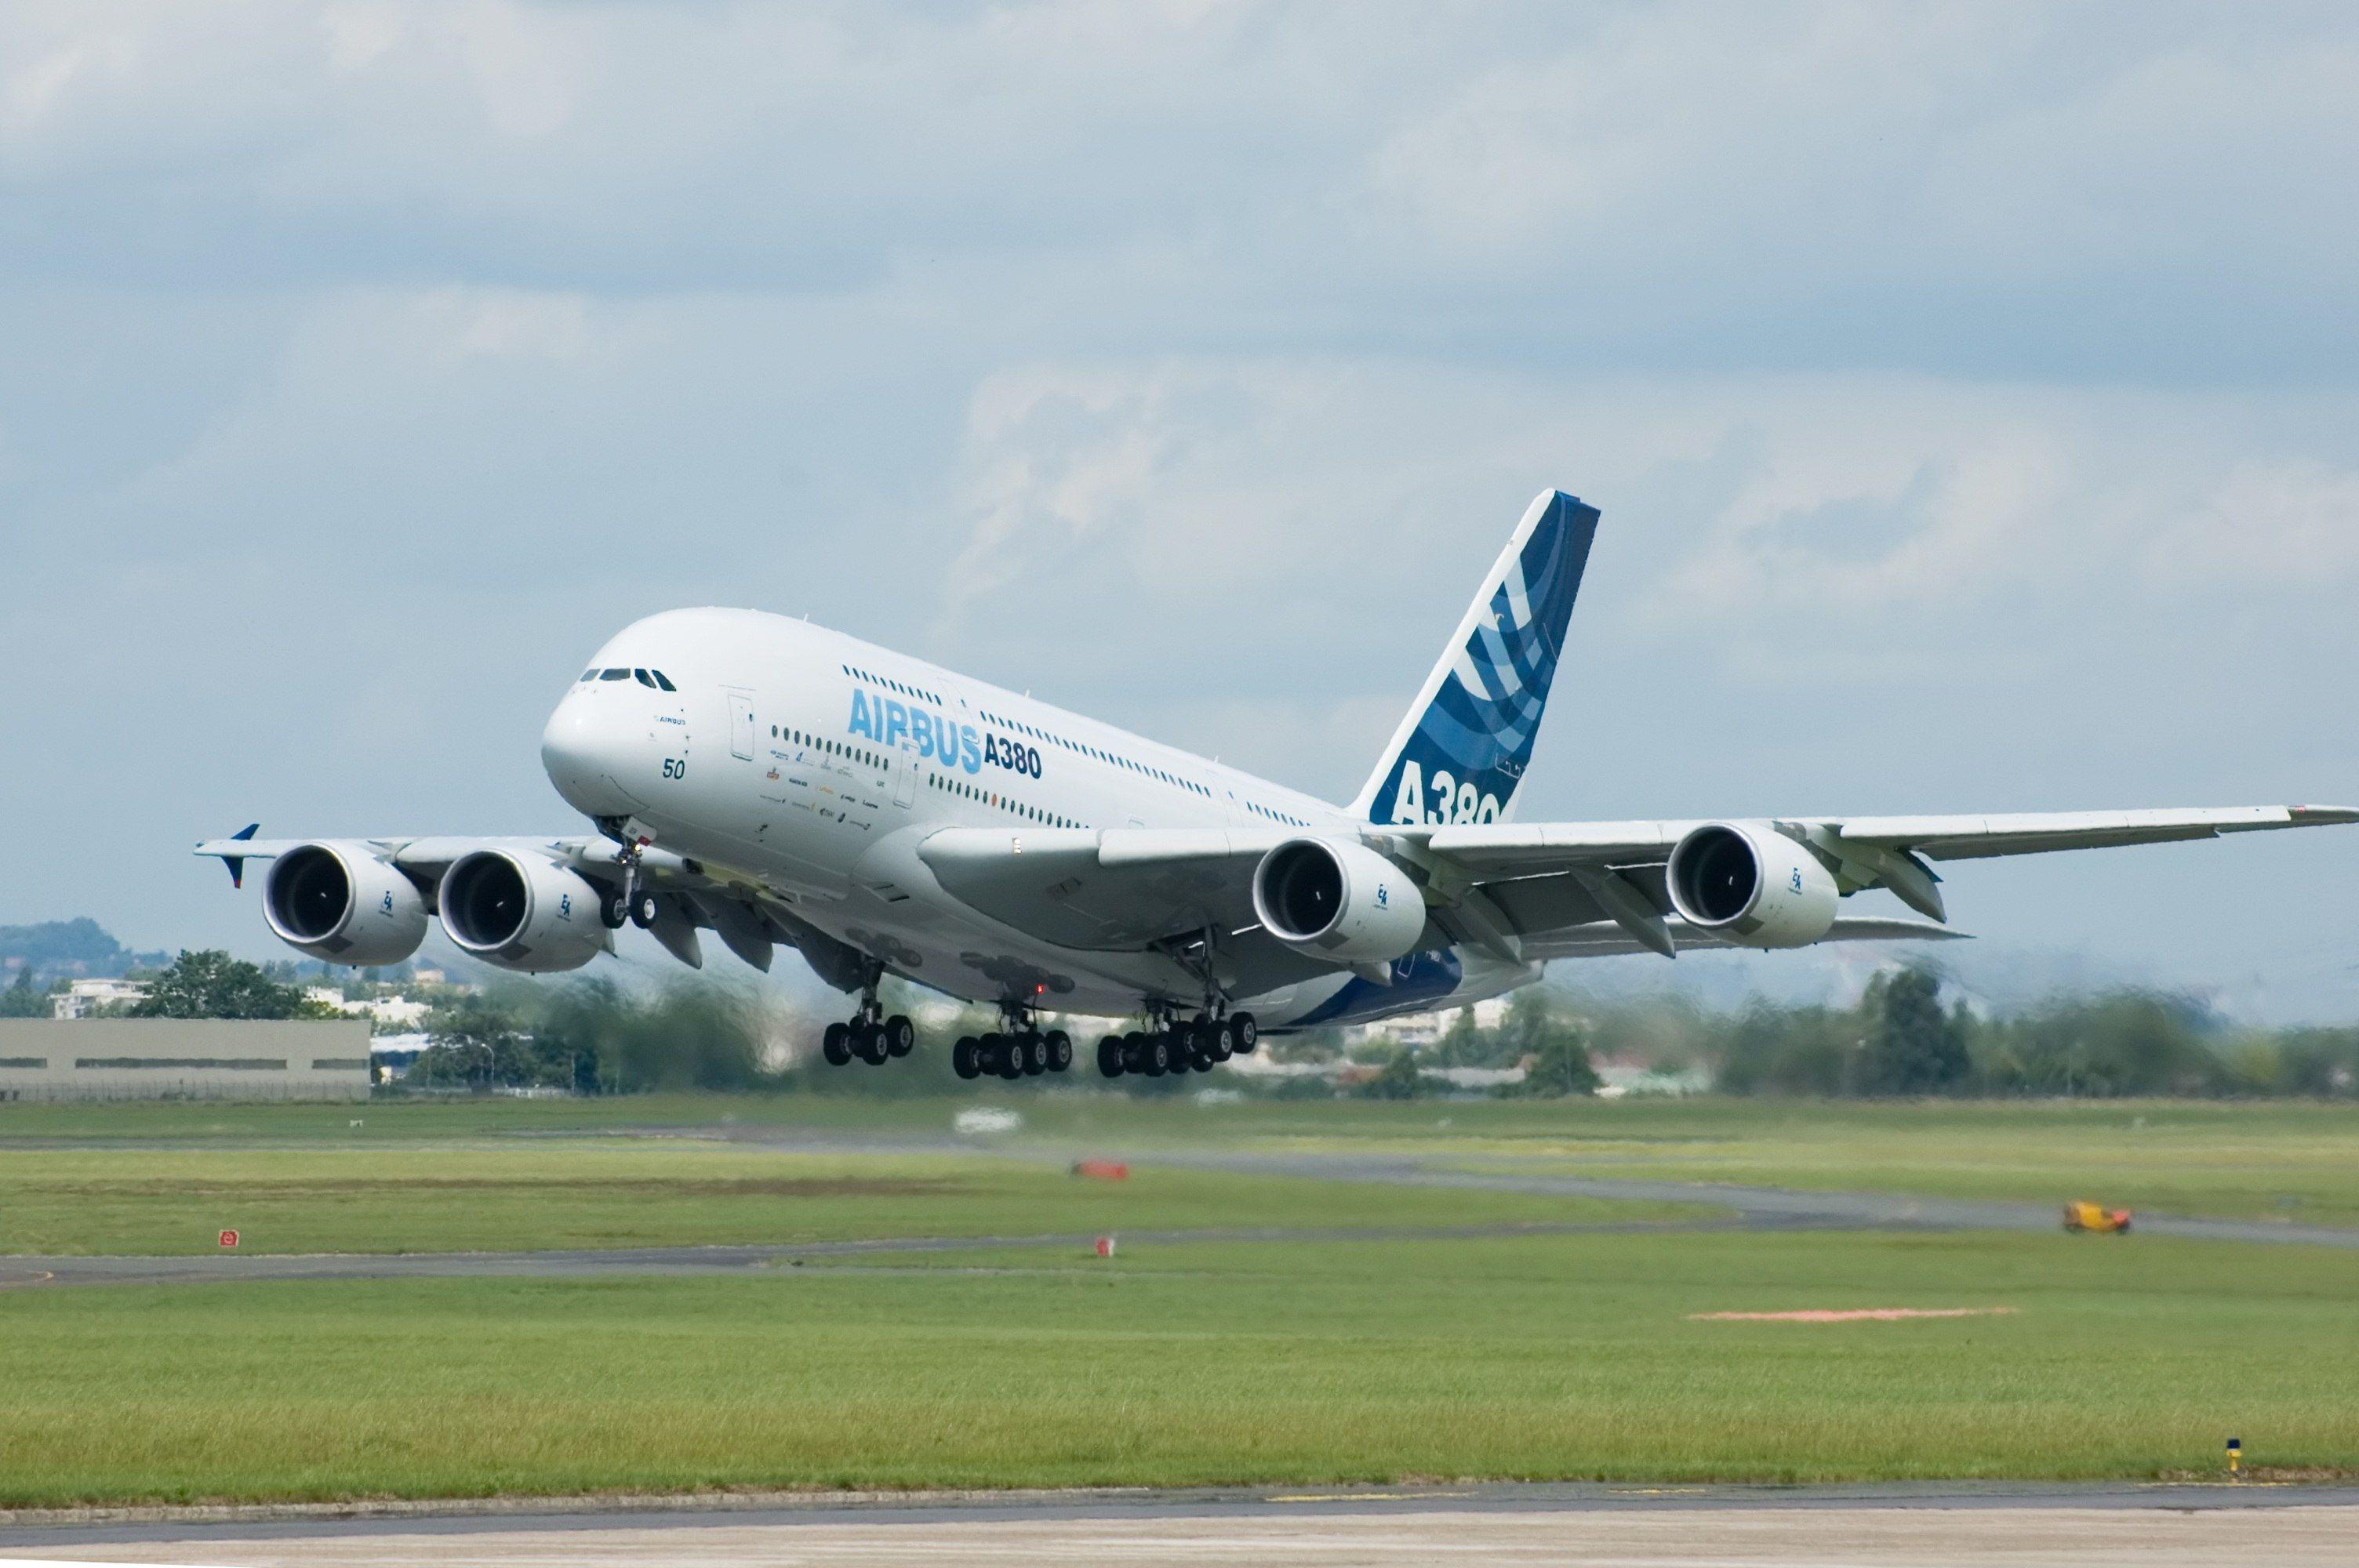 Airbus A380 HD Wallpaper for free. Download Airbus A380 Photo